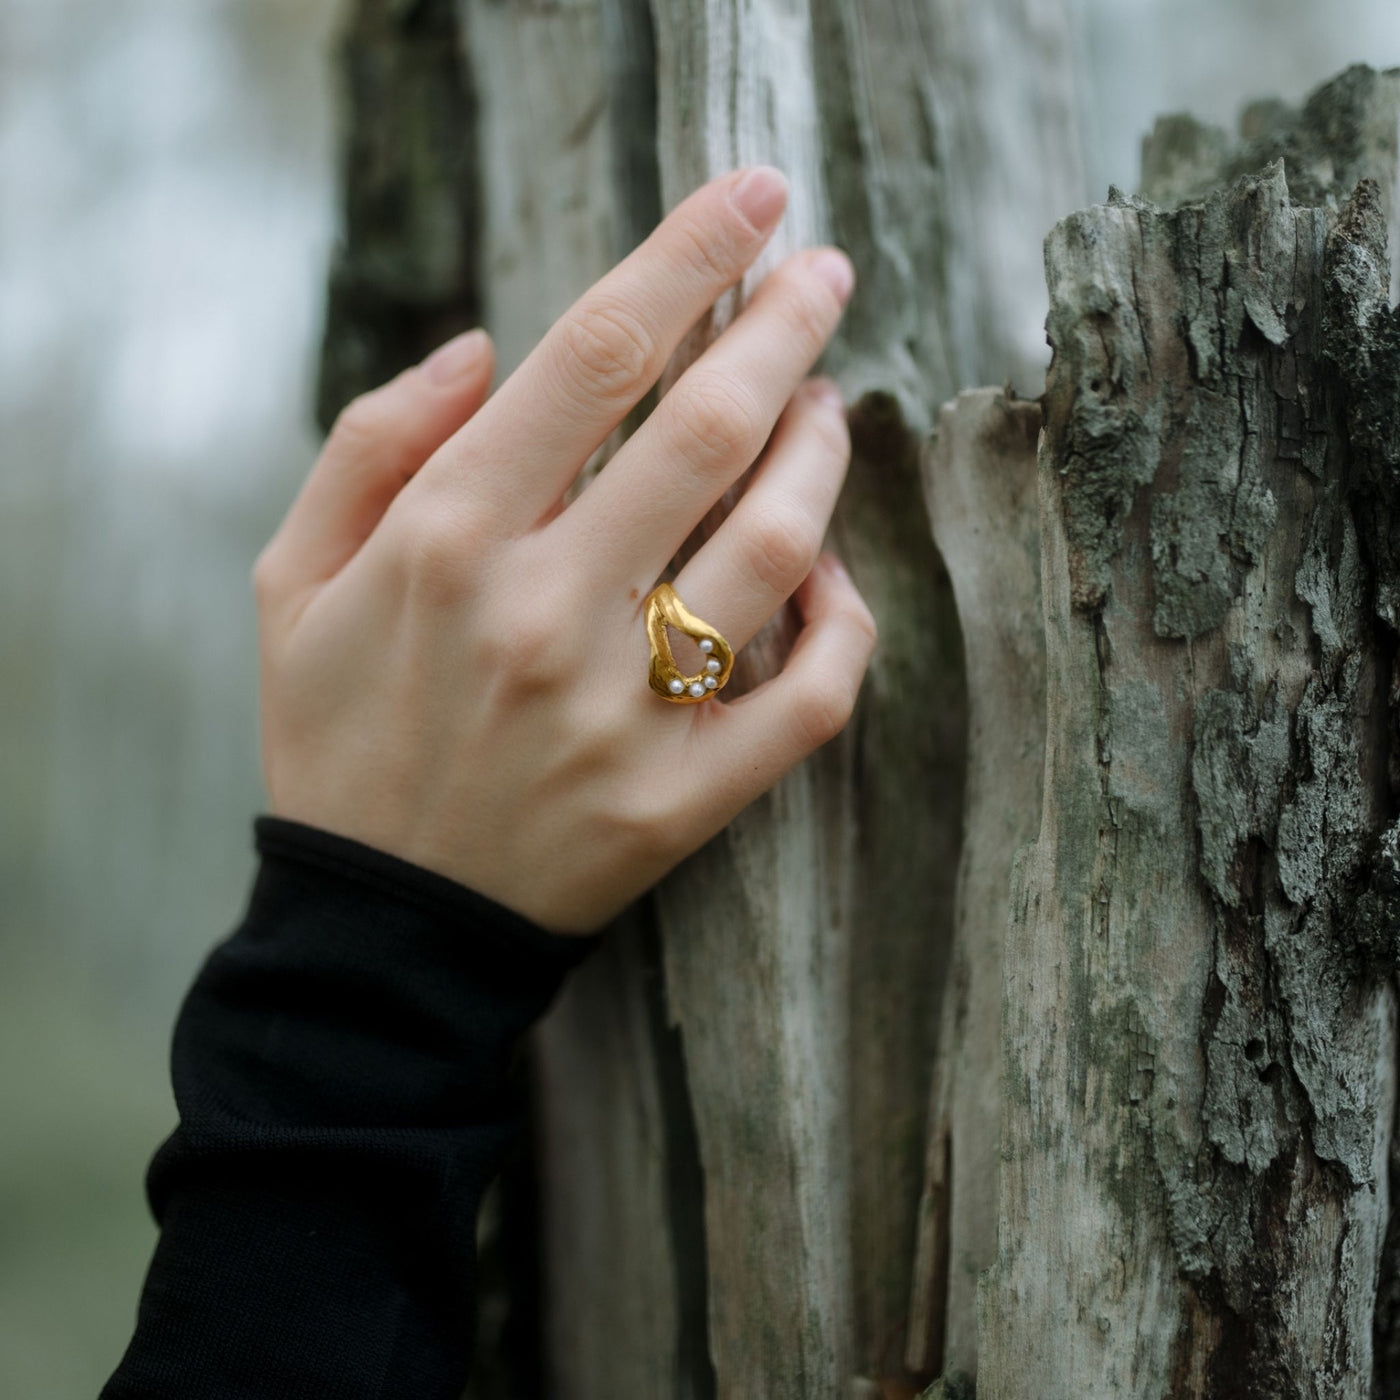 KONGELUND // Gold-plated ring with 5 fine freshwater pearls